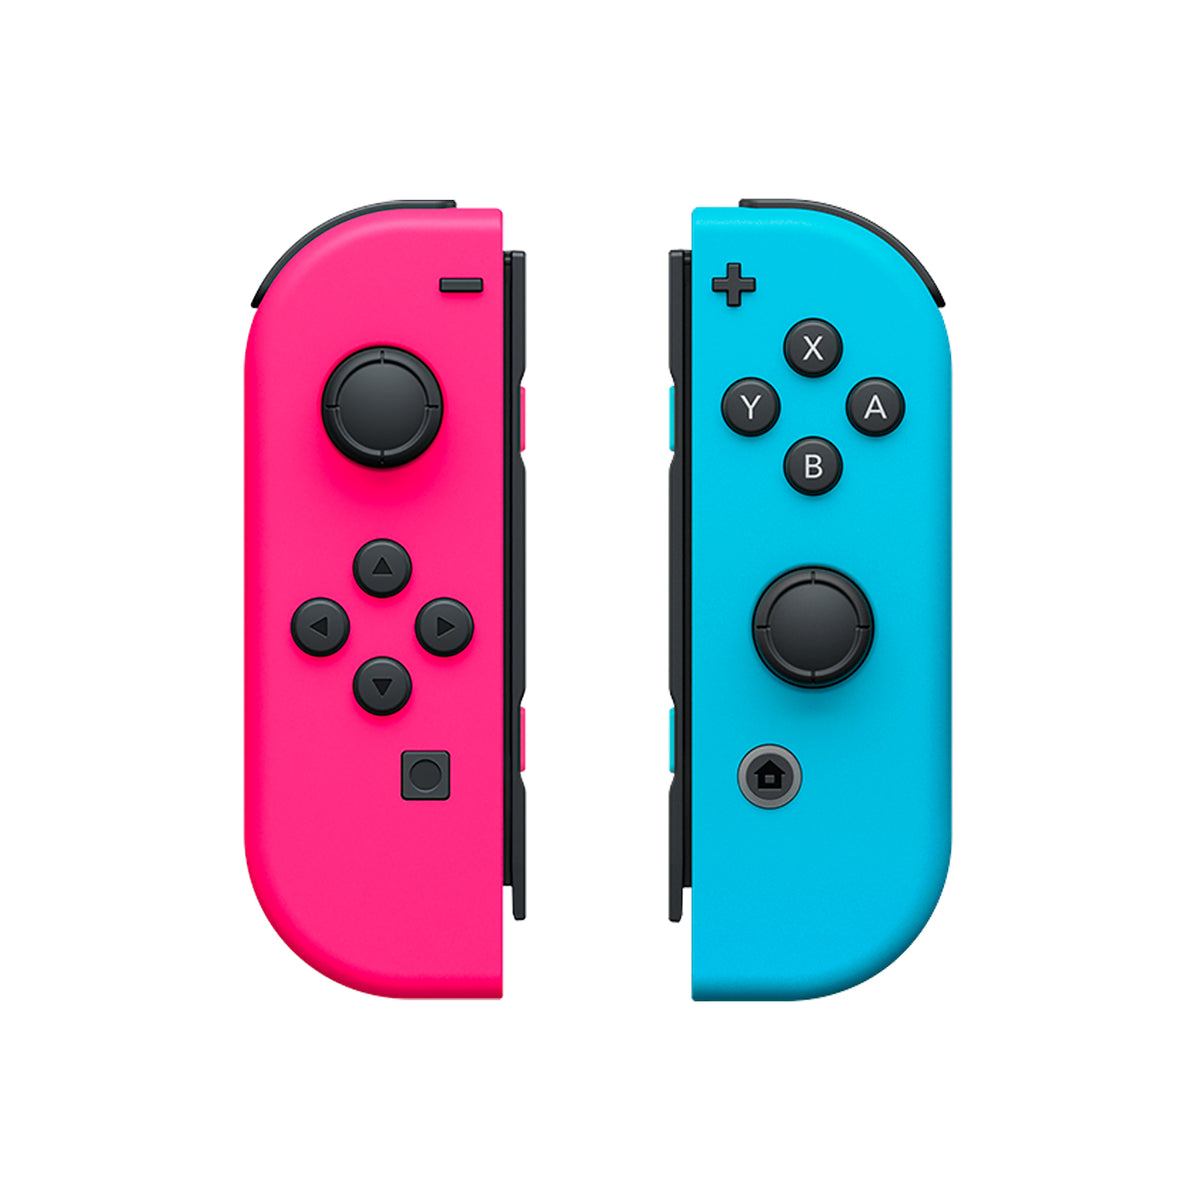 Official (OEM) Neon Pink / Neon Blue Joy Con Housing Shells for